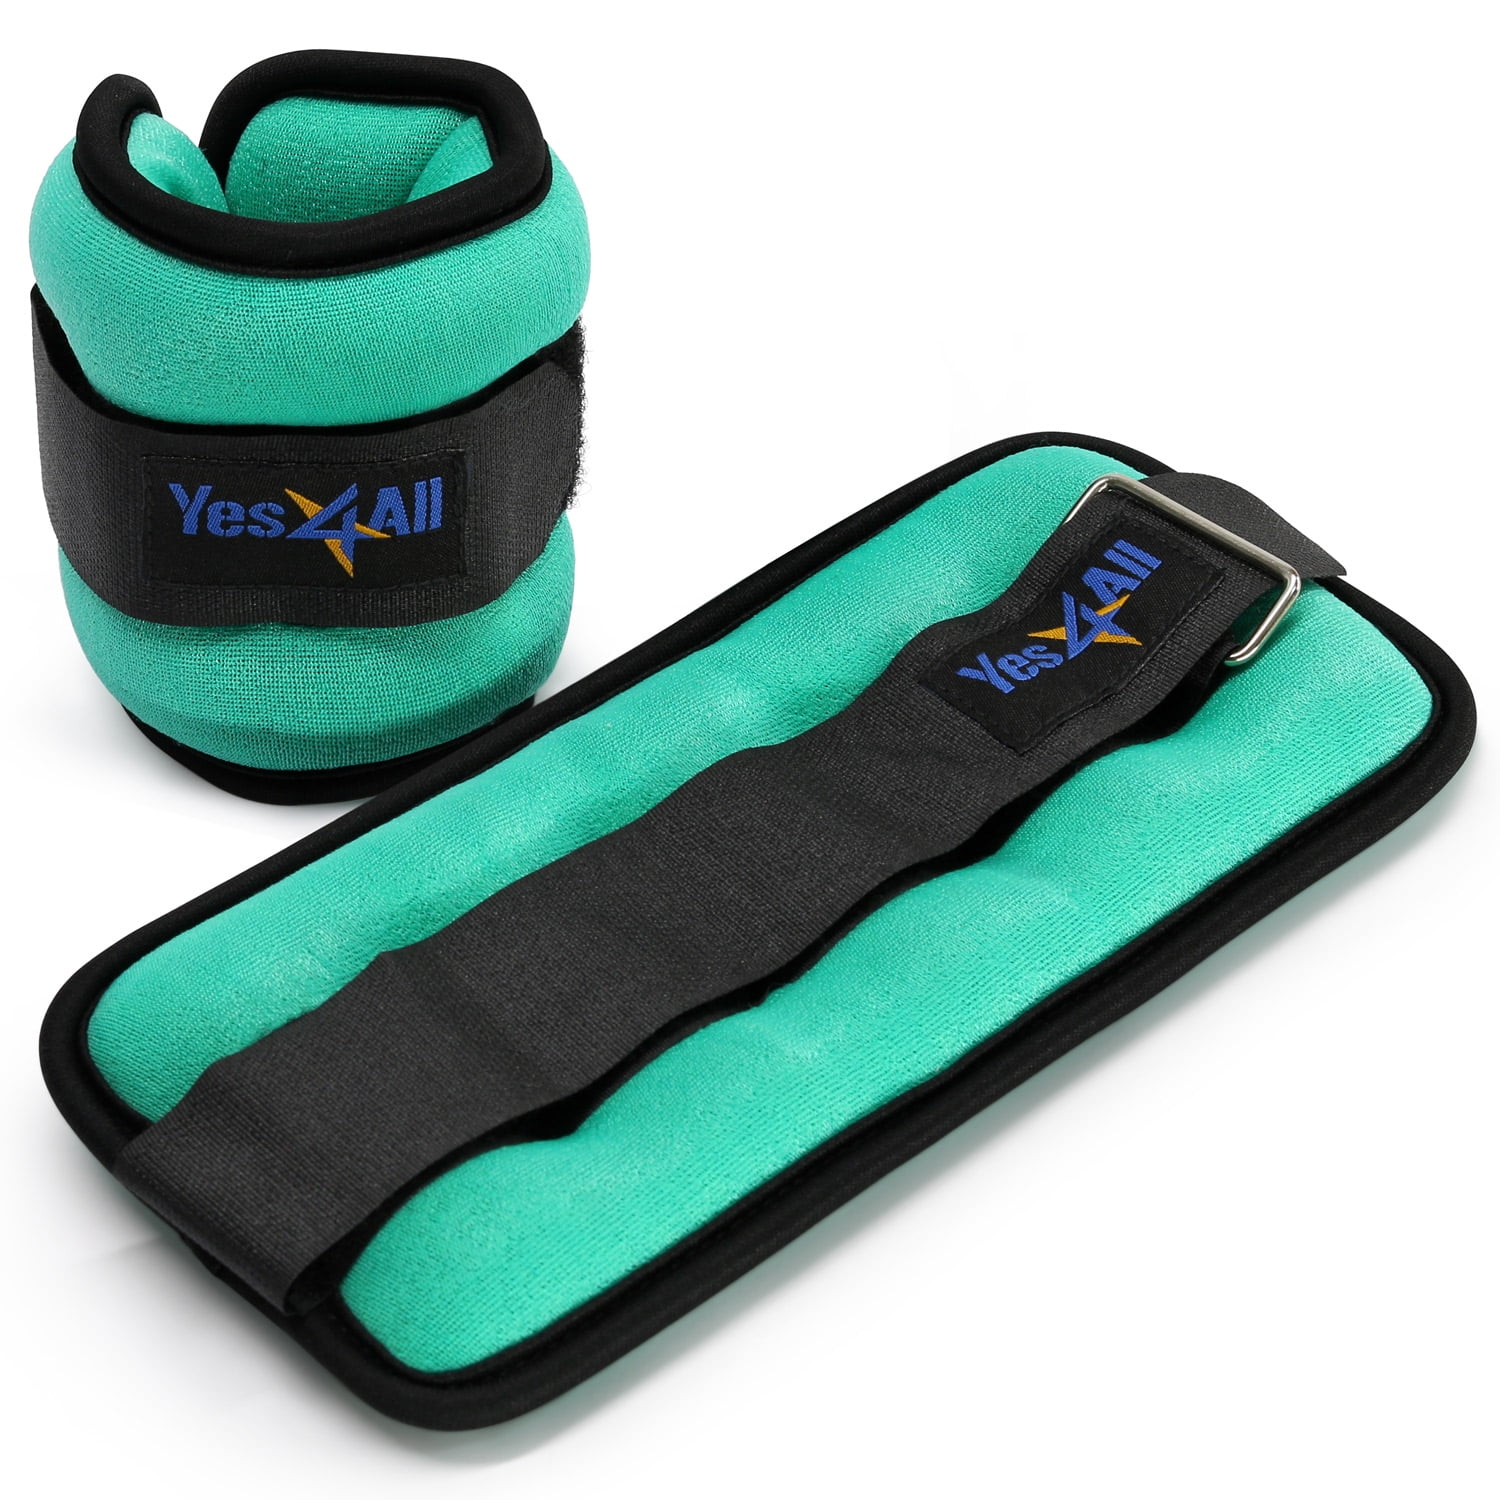 Yes4All Wrist Ankle Weights Comfort Fit Exercise Sets 1 lbs to 5 lbs Pair 